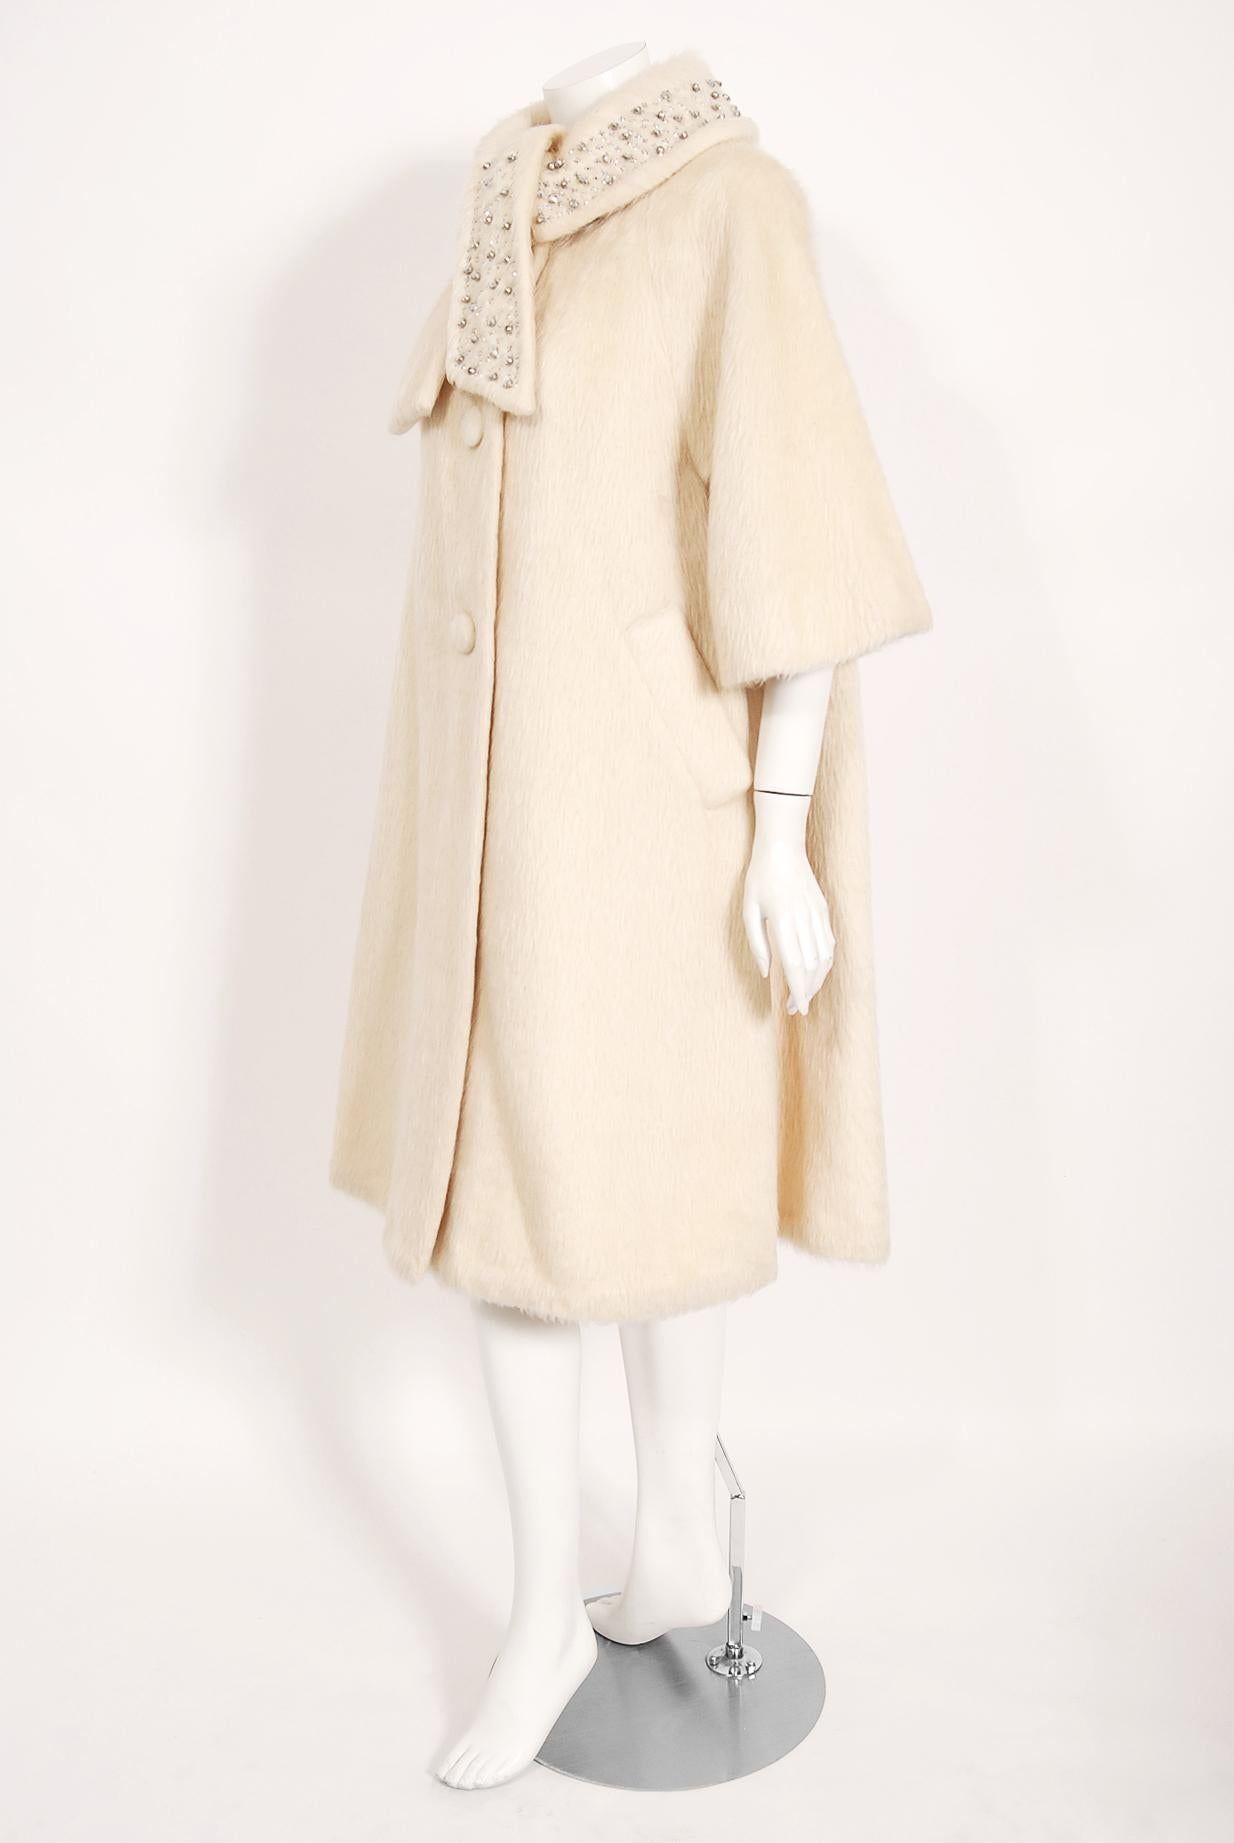 Vintage 1963 Lilli-Ann Cream Mohair Rhinestone Beaded Tie-Collar Swing Coat  In Good Condition For Sale In Beverly Hills, CA